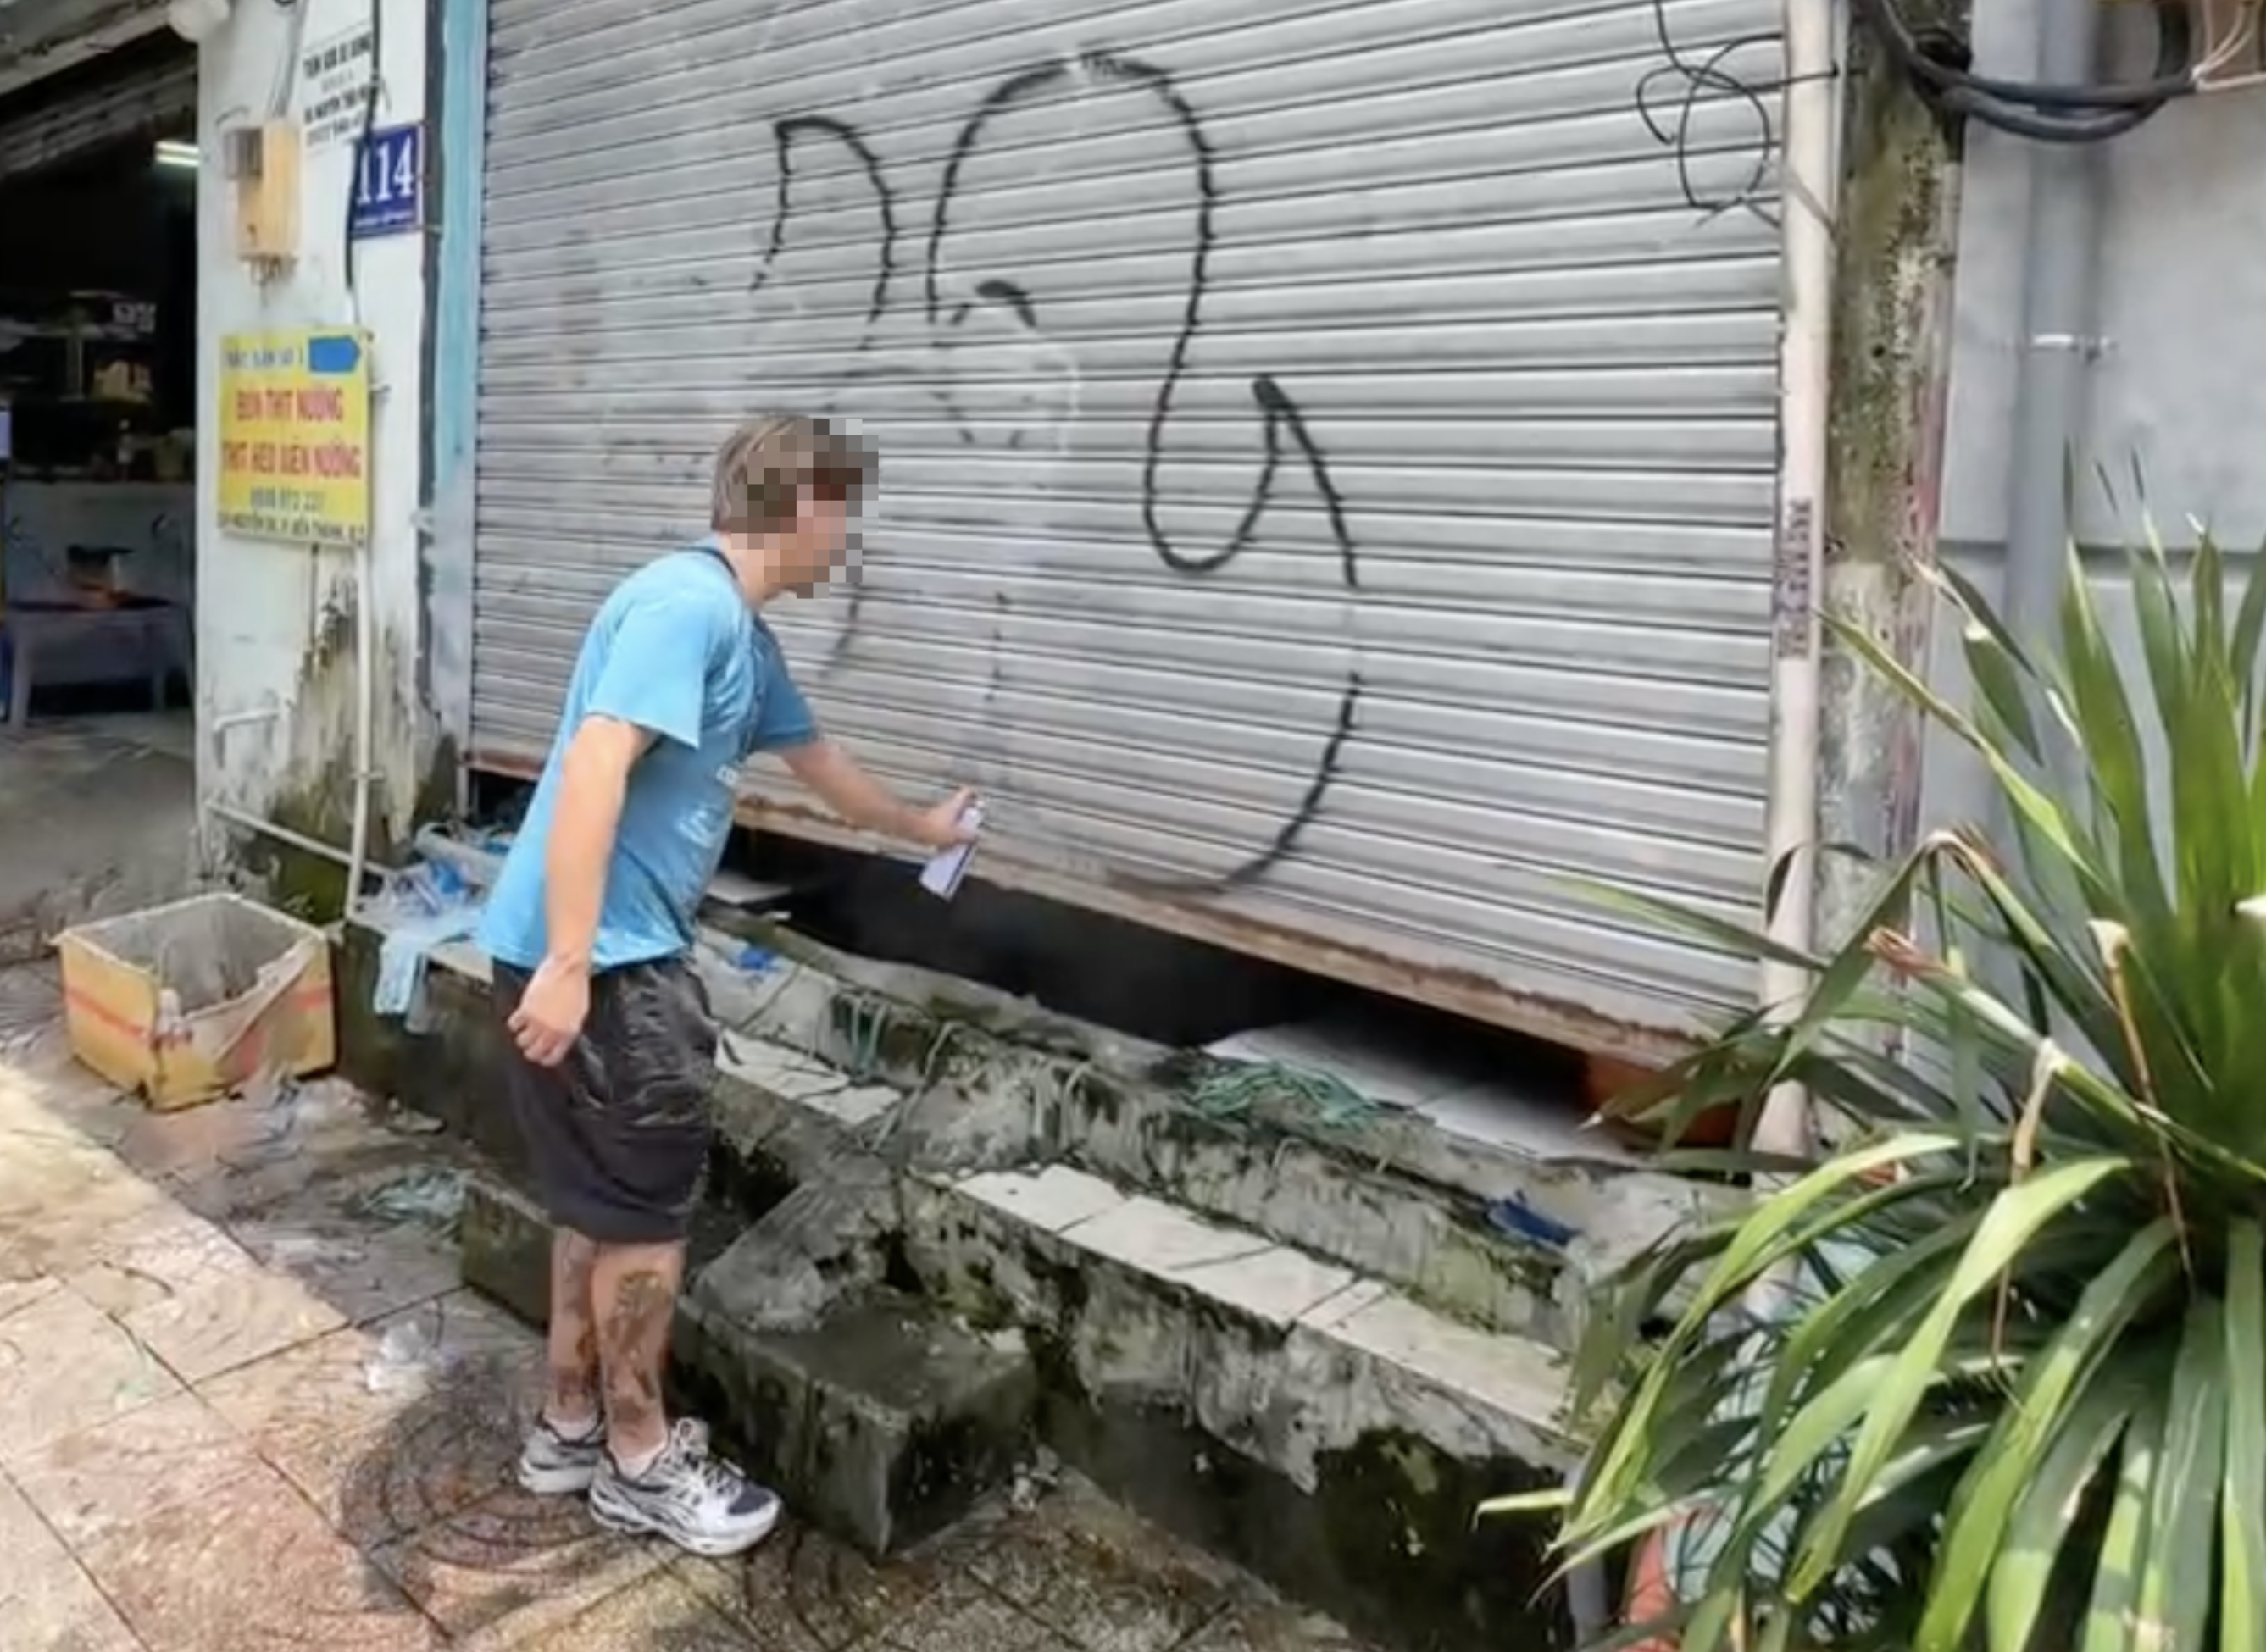 New Zealander fined for spraying paint on coiling door in downtown Ho Chi Minh City